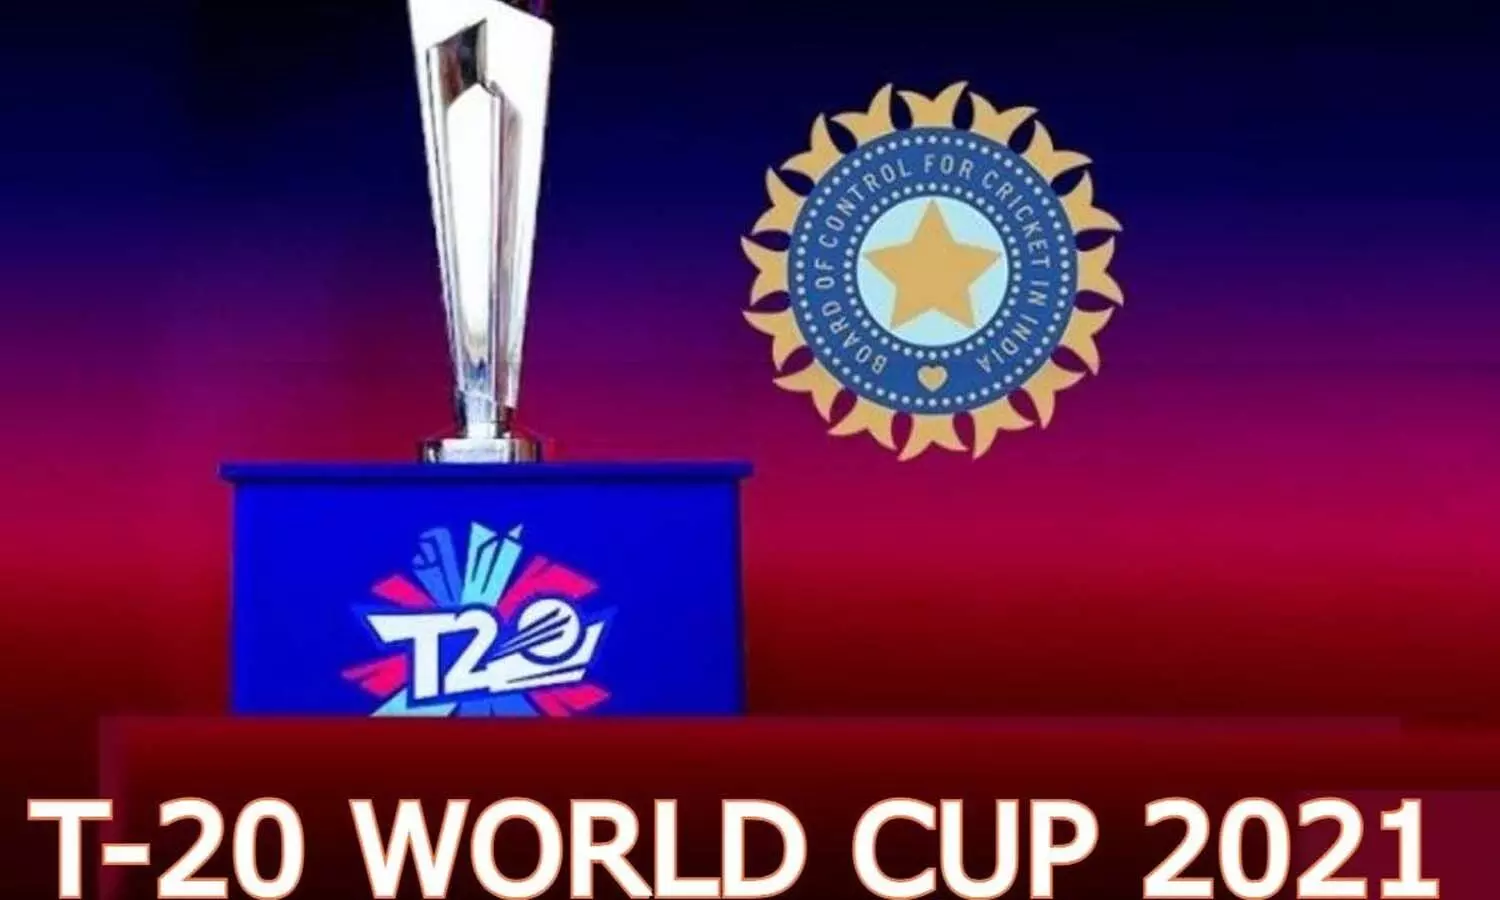 The T20 World Cup 2021